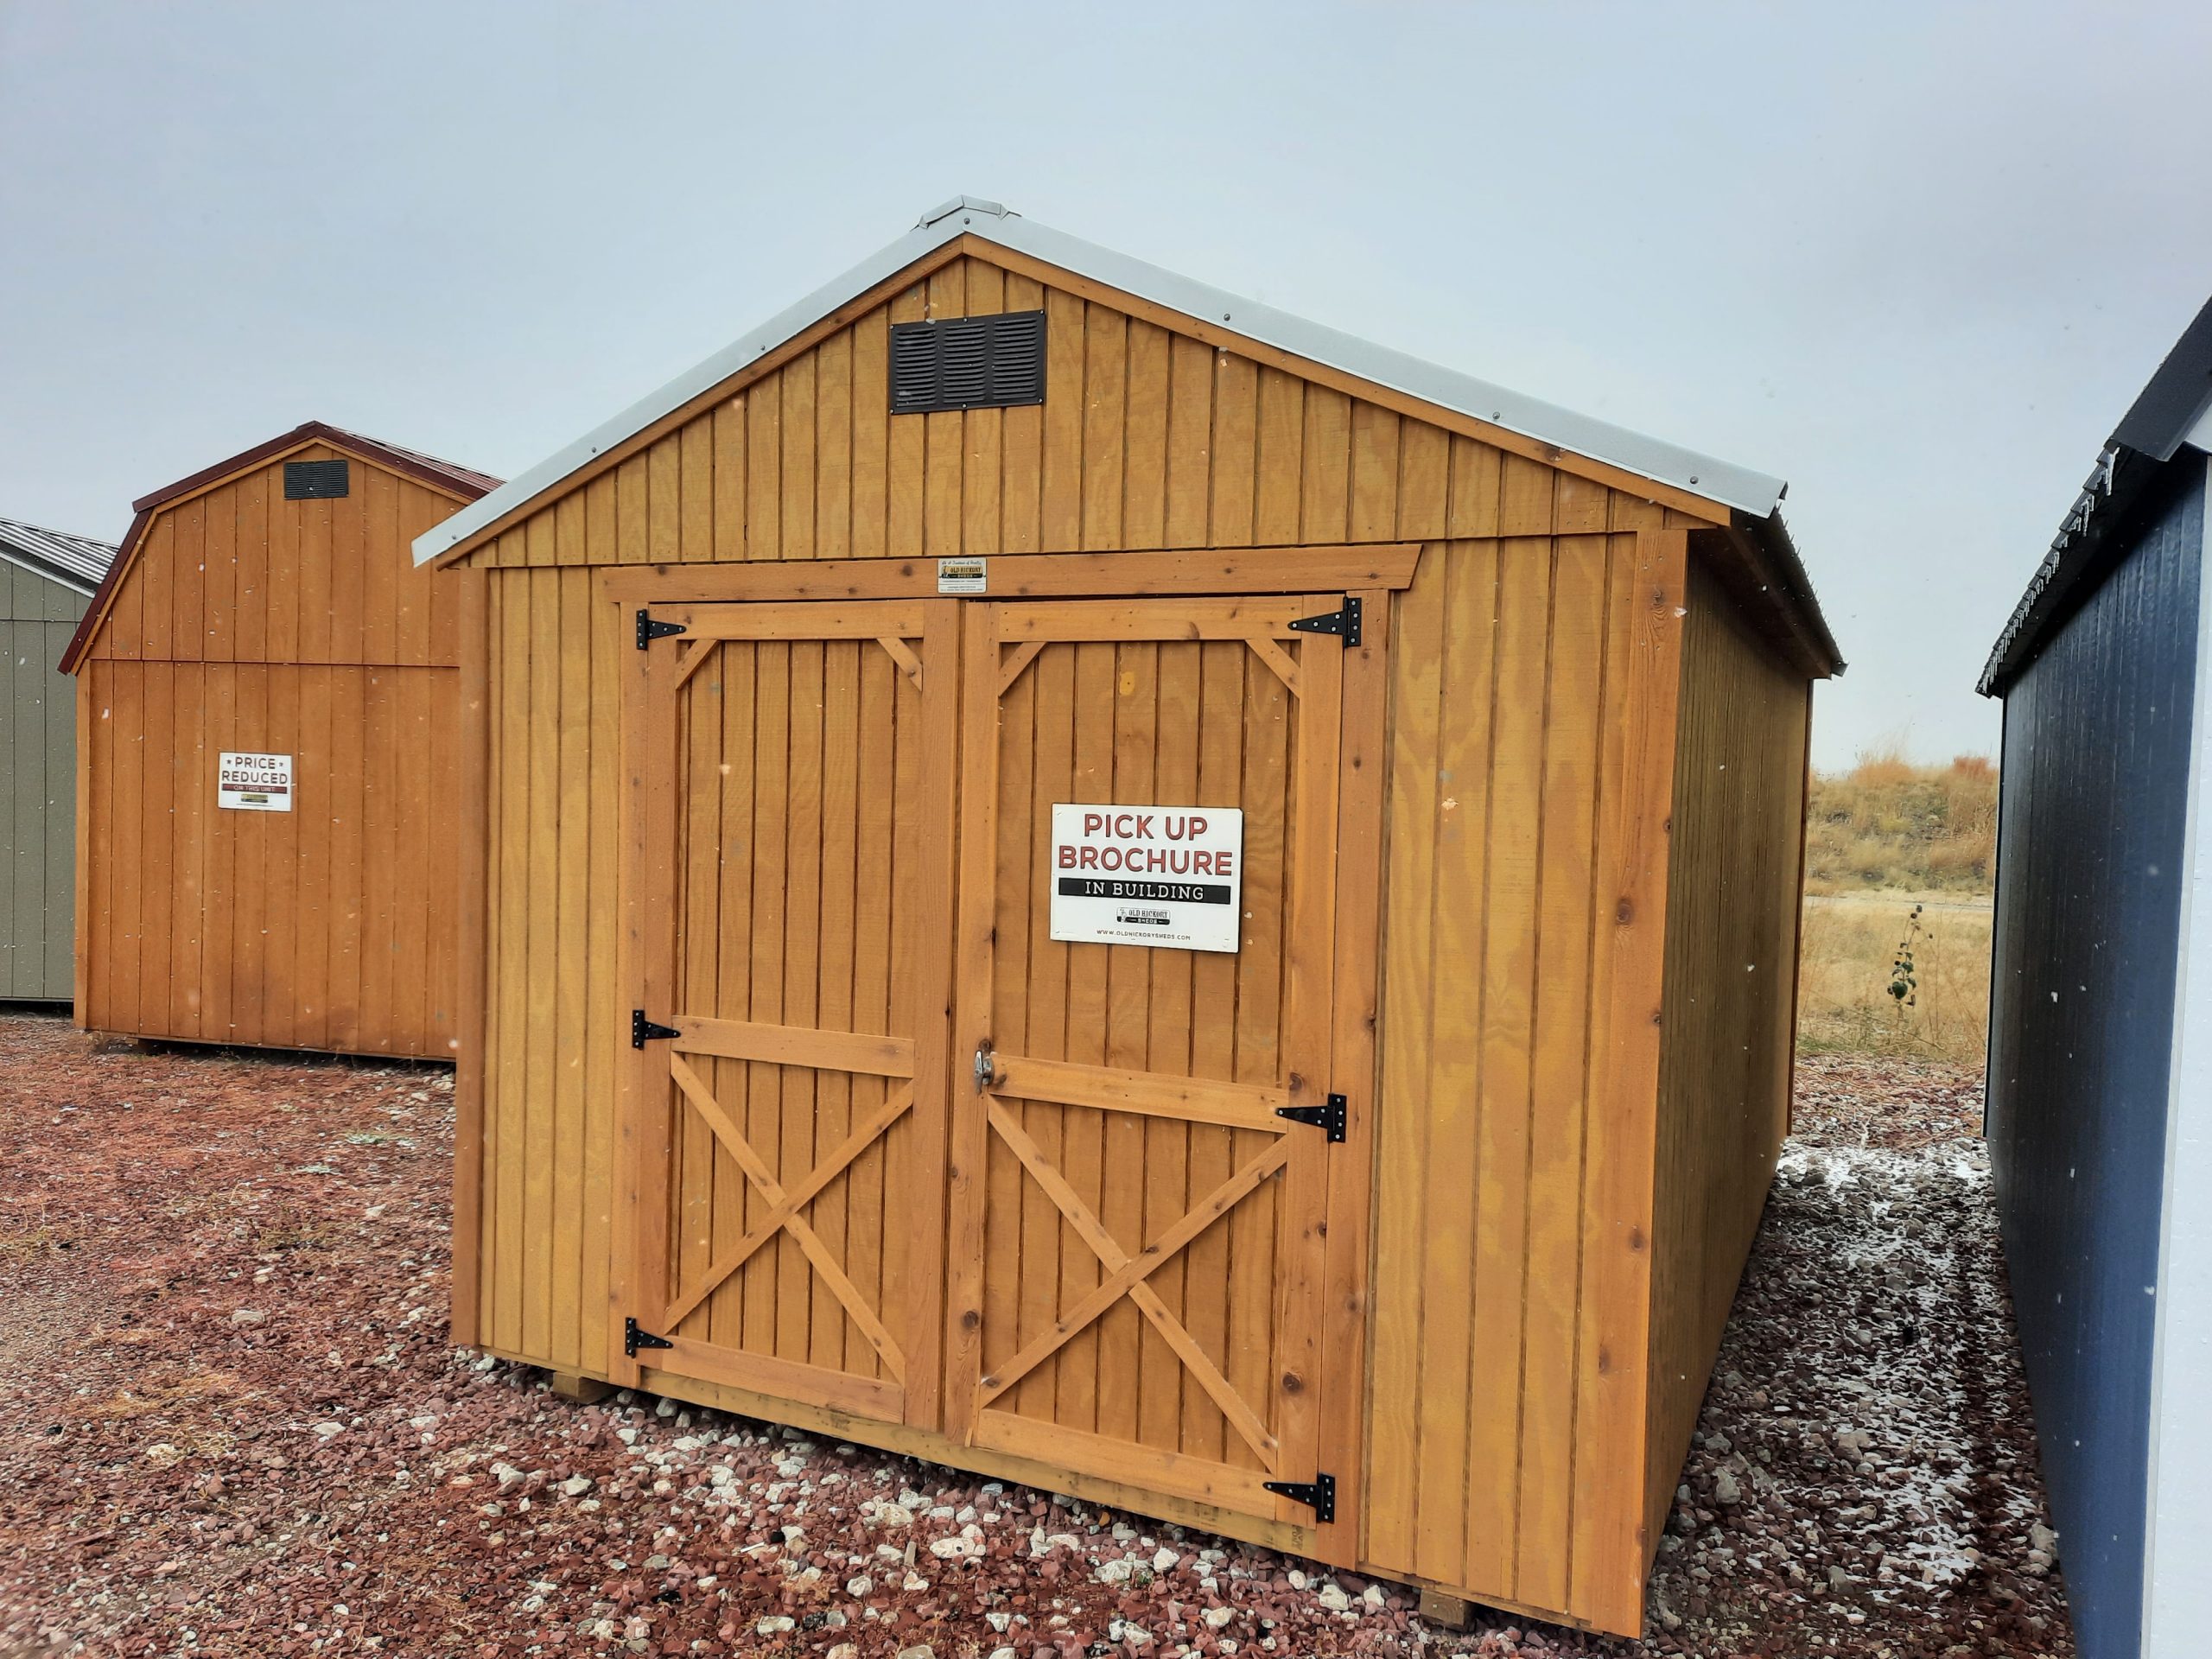 Buy Now: 10×16 Utility Shed For Sale Stained or Custom Order at French Creek Design Shed Sales in Casper, WY